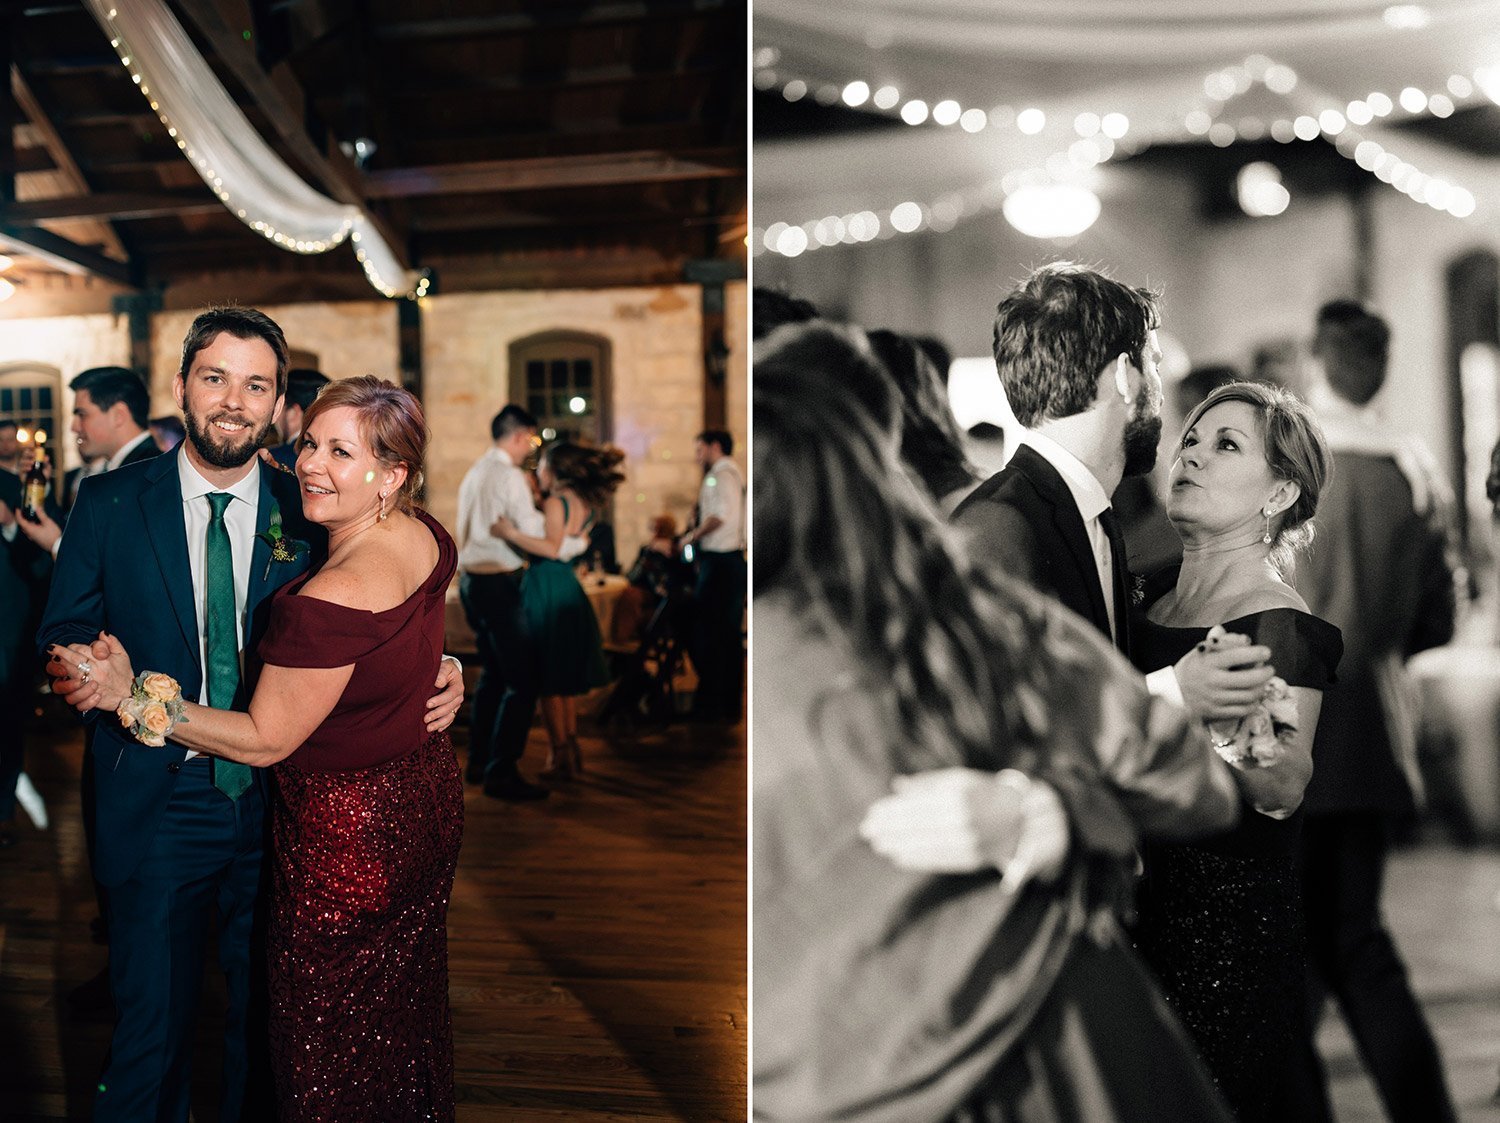 groom dances with his mother at wedding reception